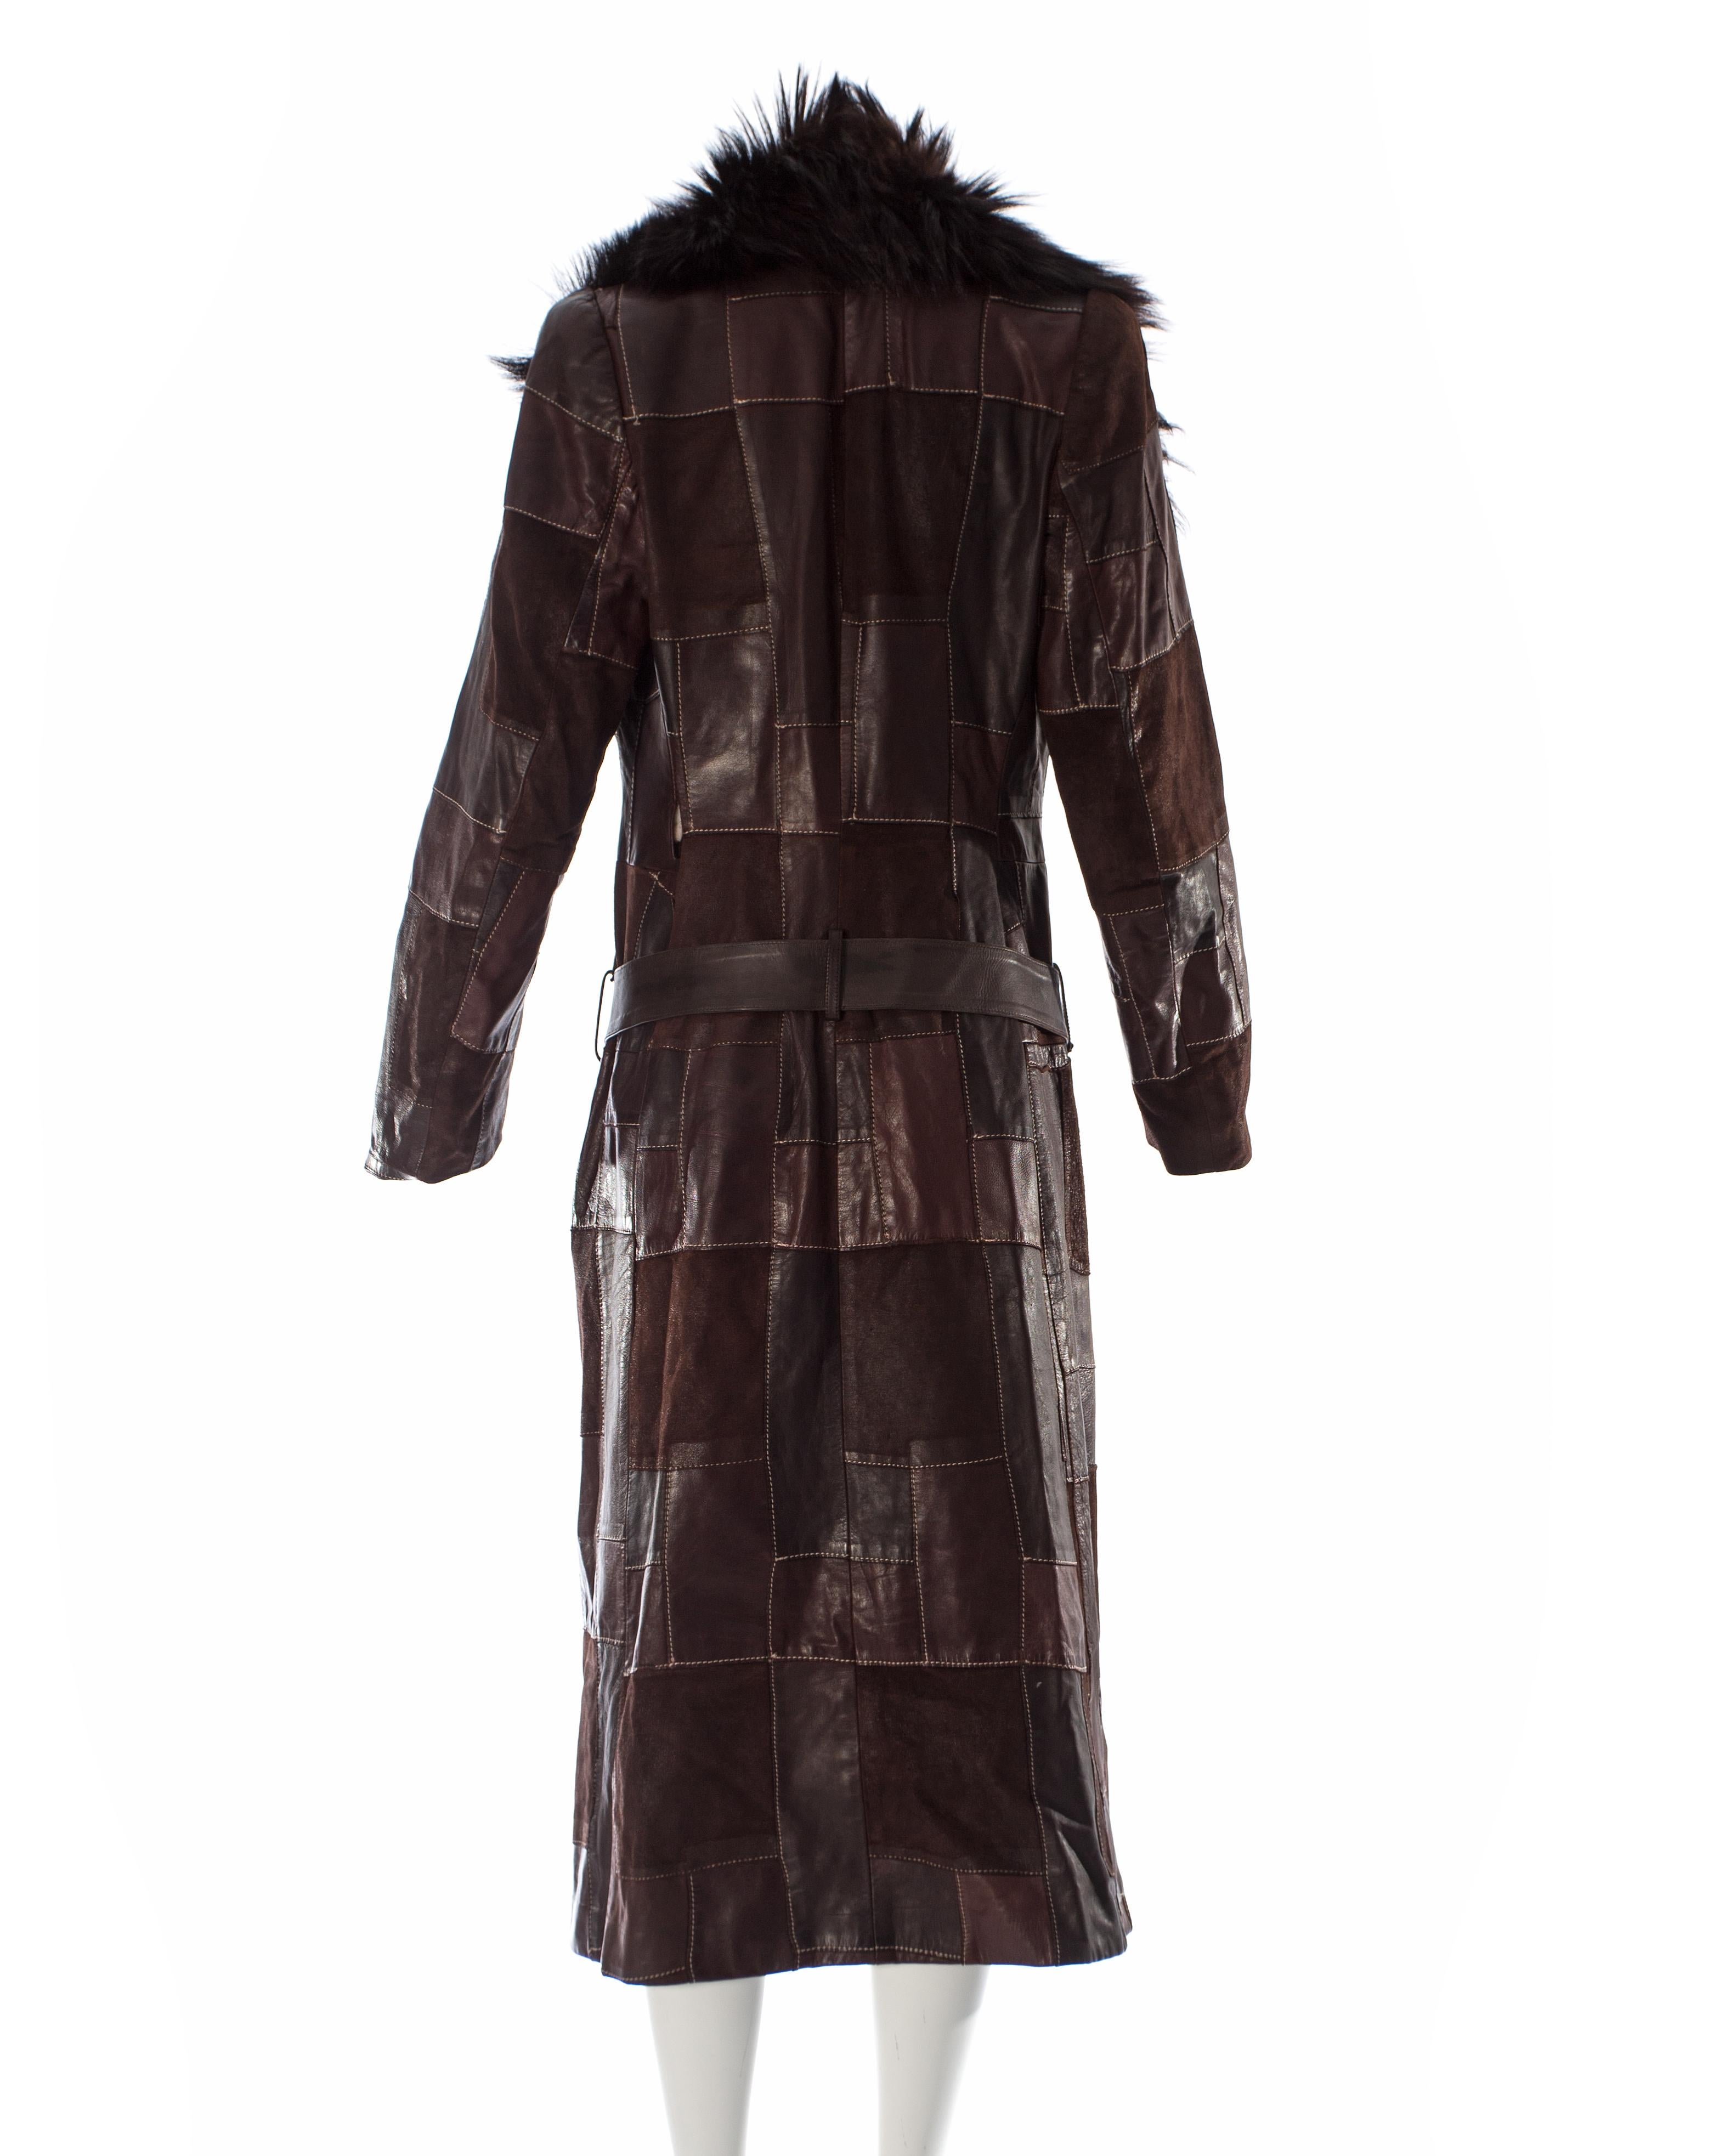 Alexander McQueen brown leather patchwork coat with goat hair collar, A / W 2000 In Good Condition For Sale In London, GB